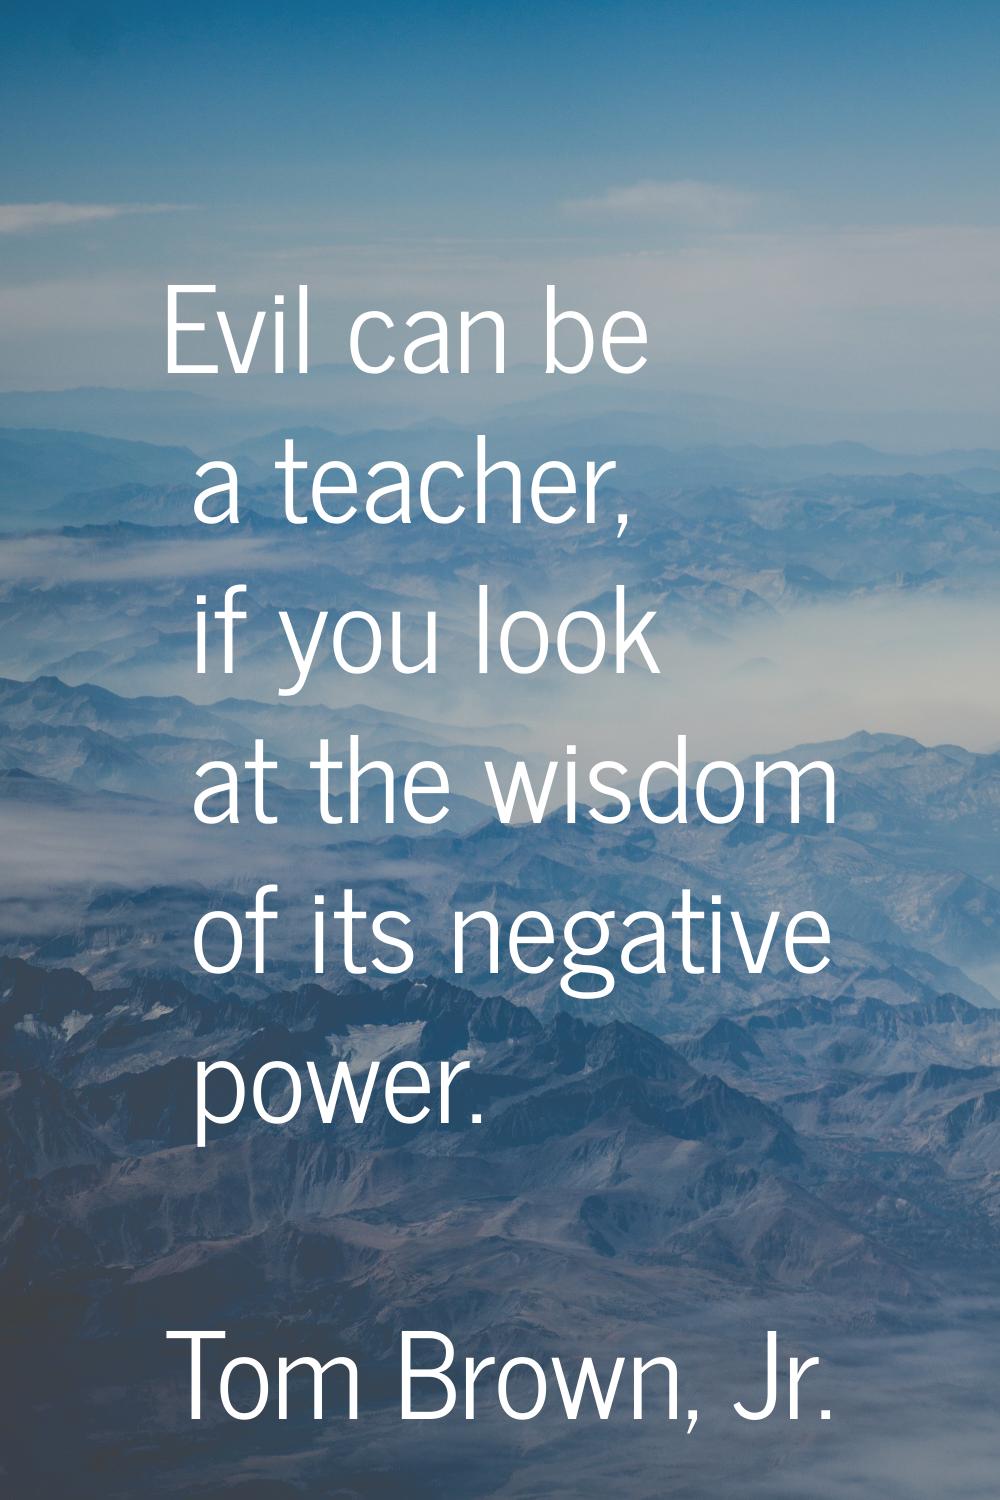 Evil can be a teacher, if you look at the wisdom of its negative power.